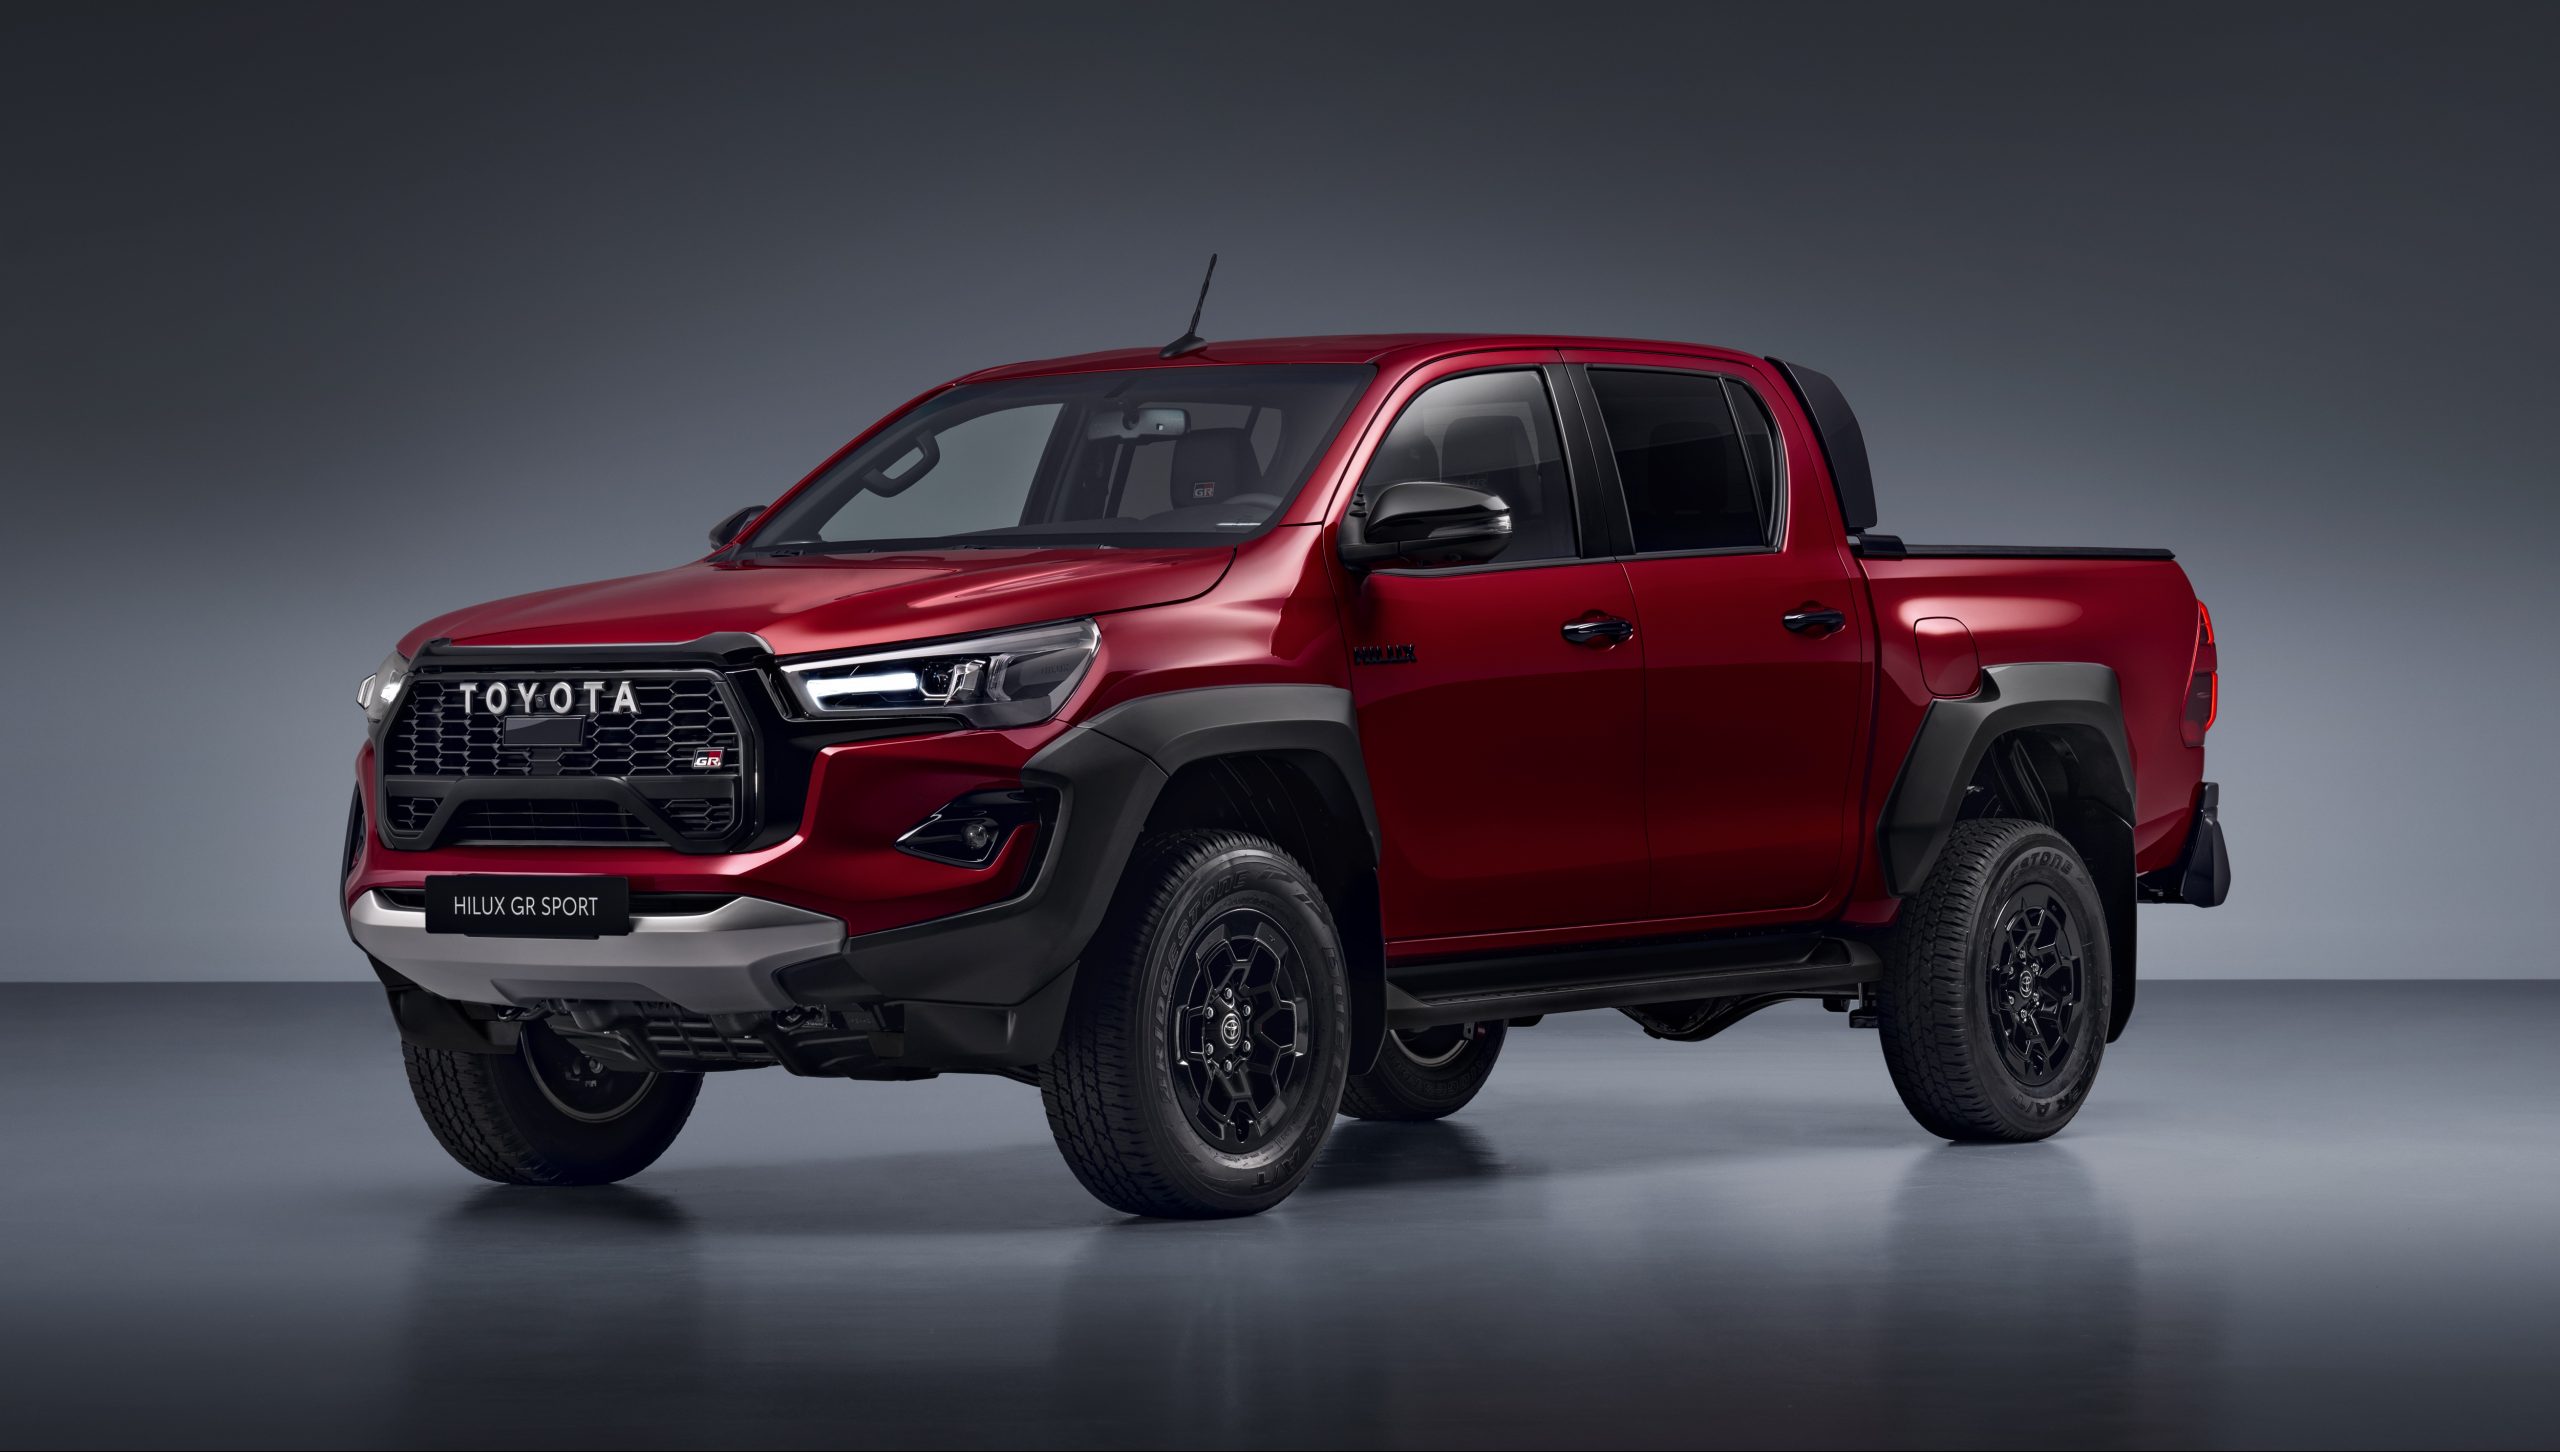 New GR Sport II to take Toyota Hilux to new heights - Toyota Media Site